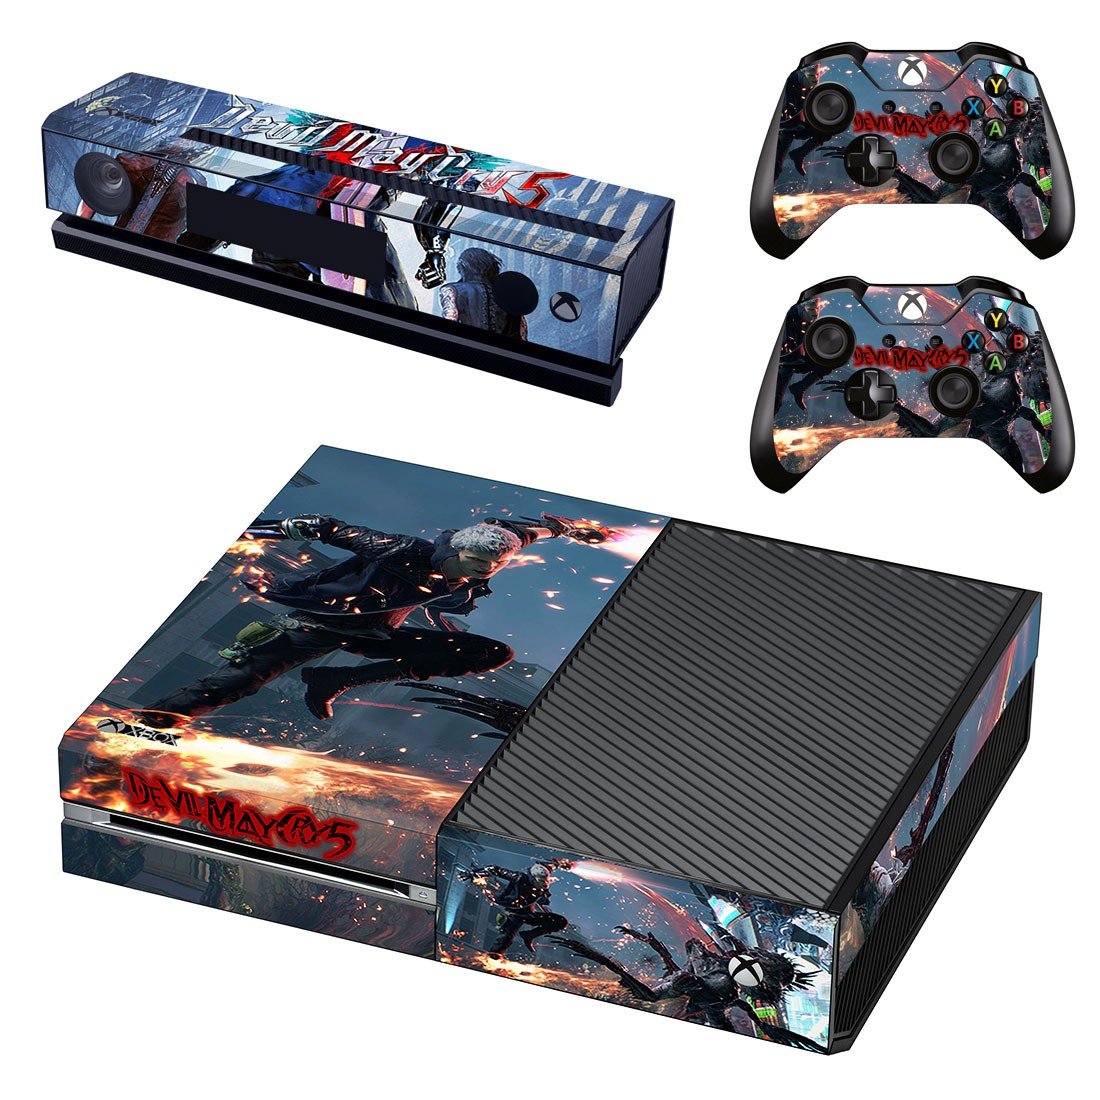 Xbox One Skin Cover - Devil May Cry 5